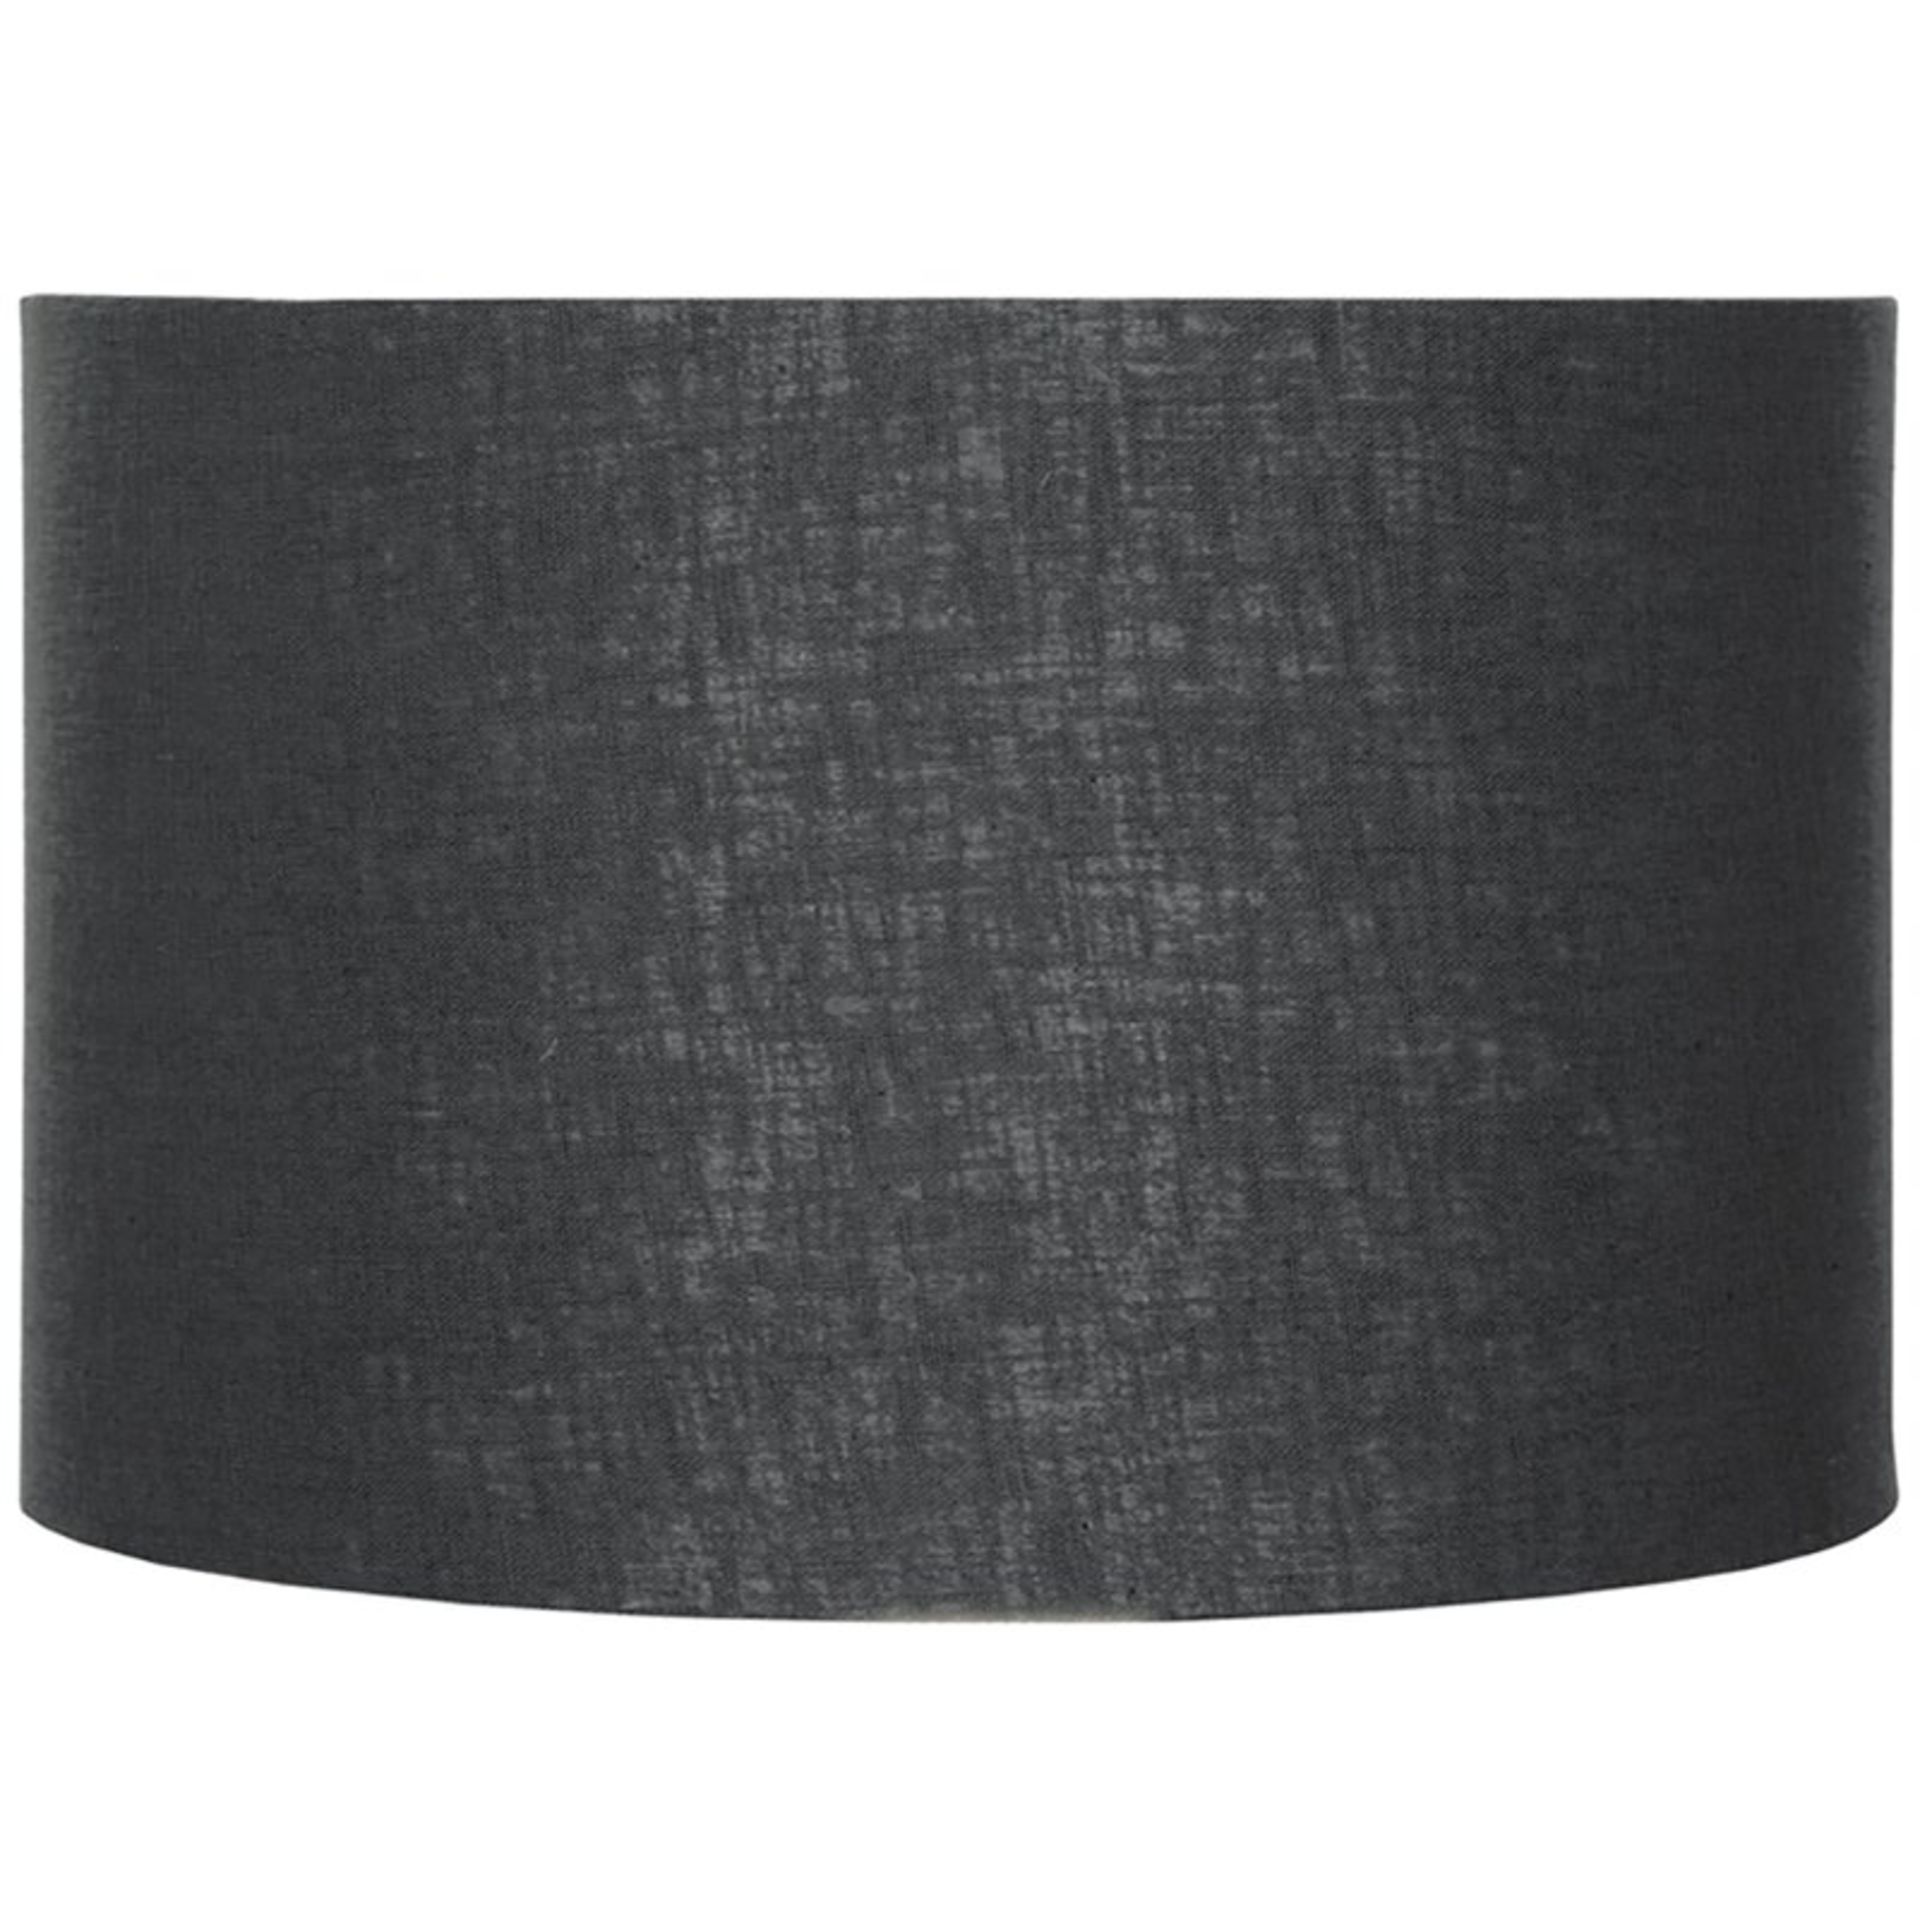 Self-Lined 25.5cm Linen Drum Lamp Shade -RRP £31.99